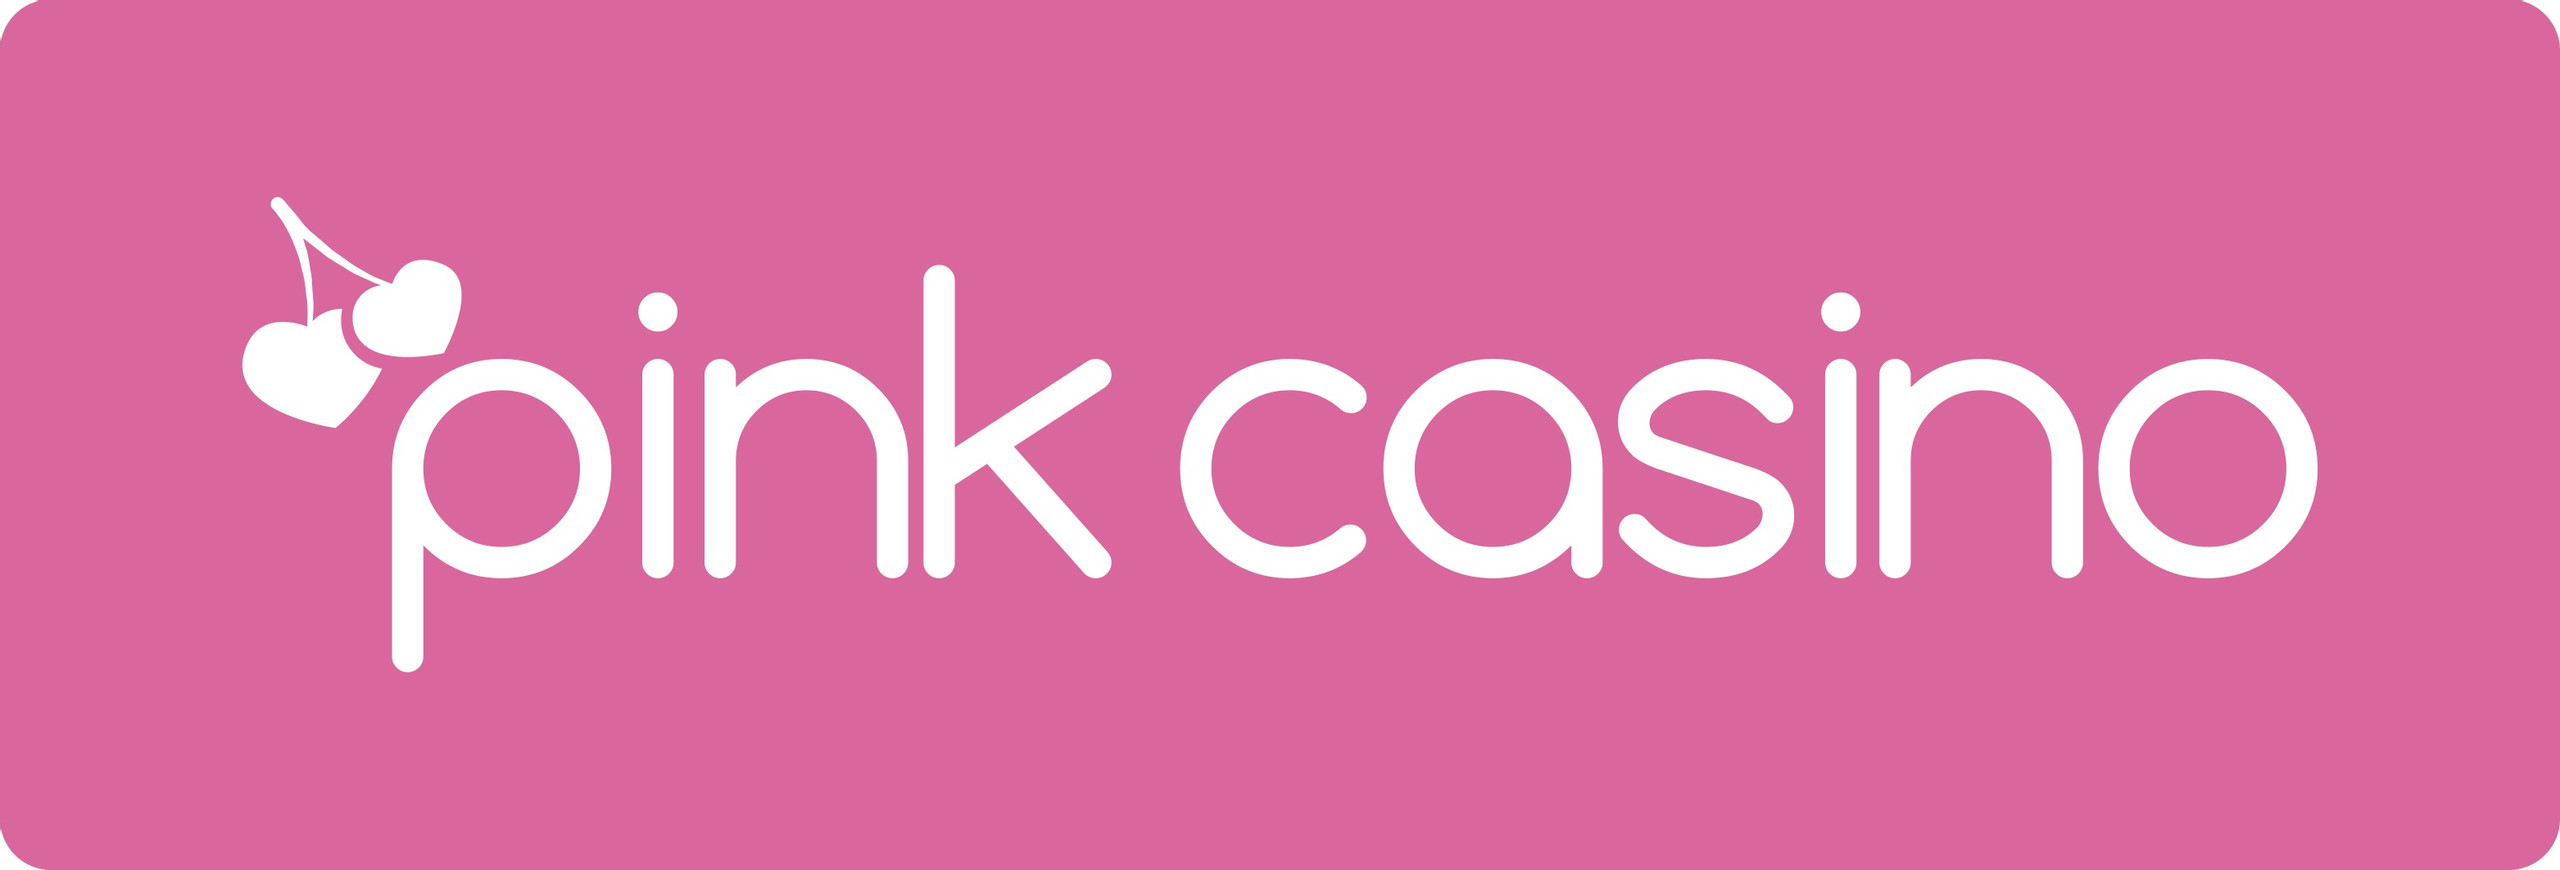 Pink Casino being launched in Canada